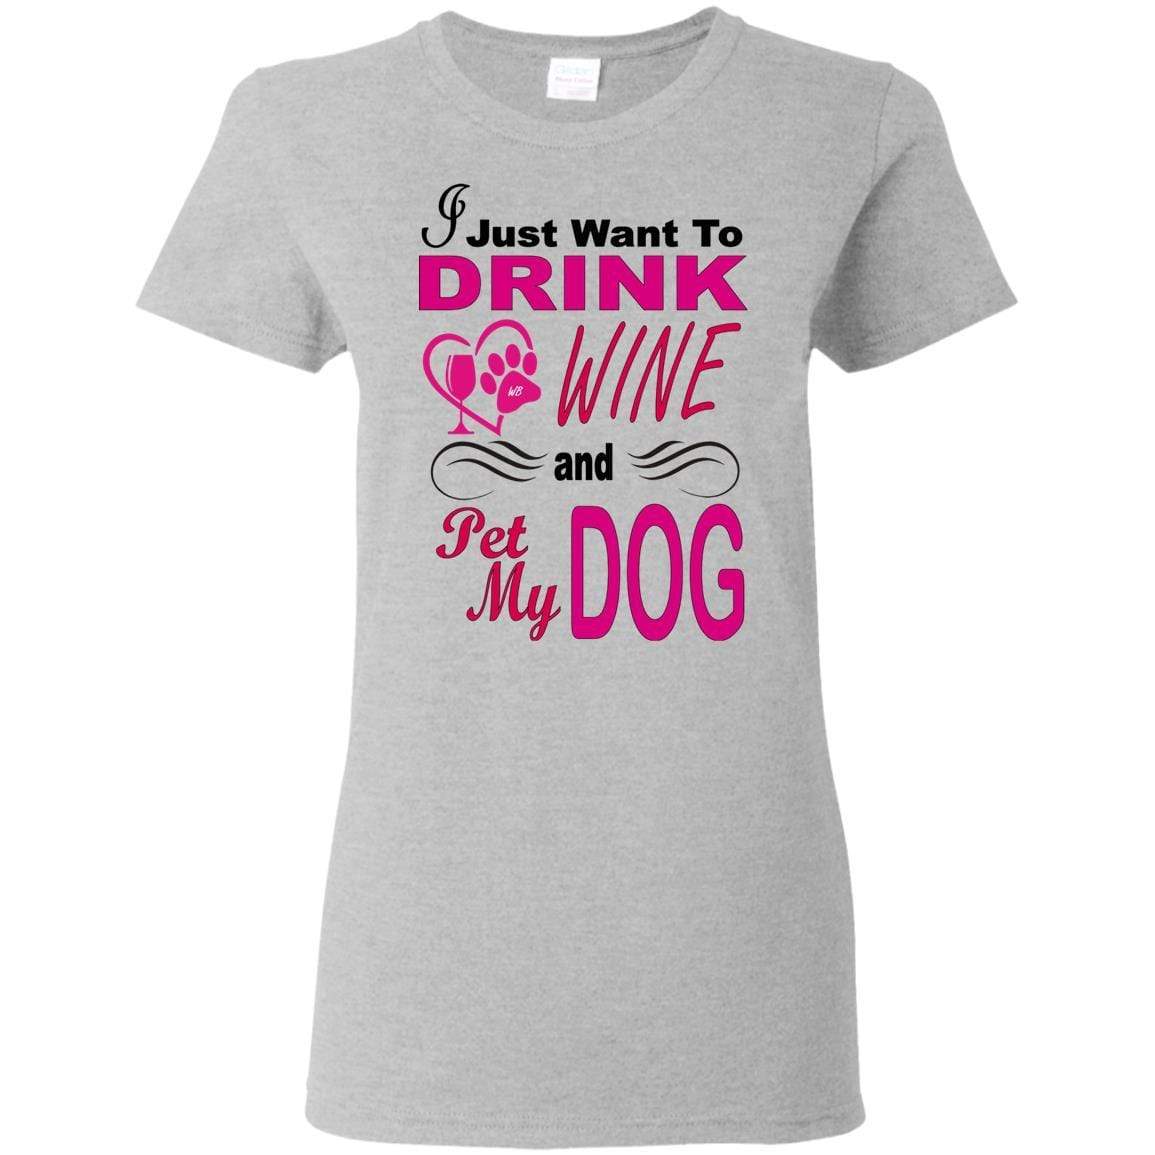 T-Shirts Sport Grey / S WineyBitches.co You know you want to... "I Just Want To Drink Wine & Pet My Dog" Ladies T-Shirt WineyBitchesCo